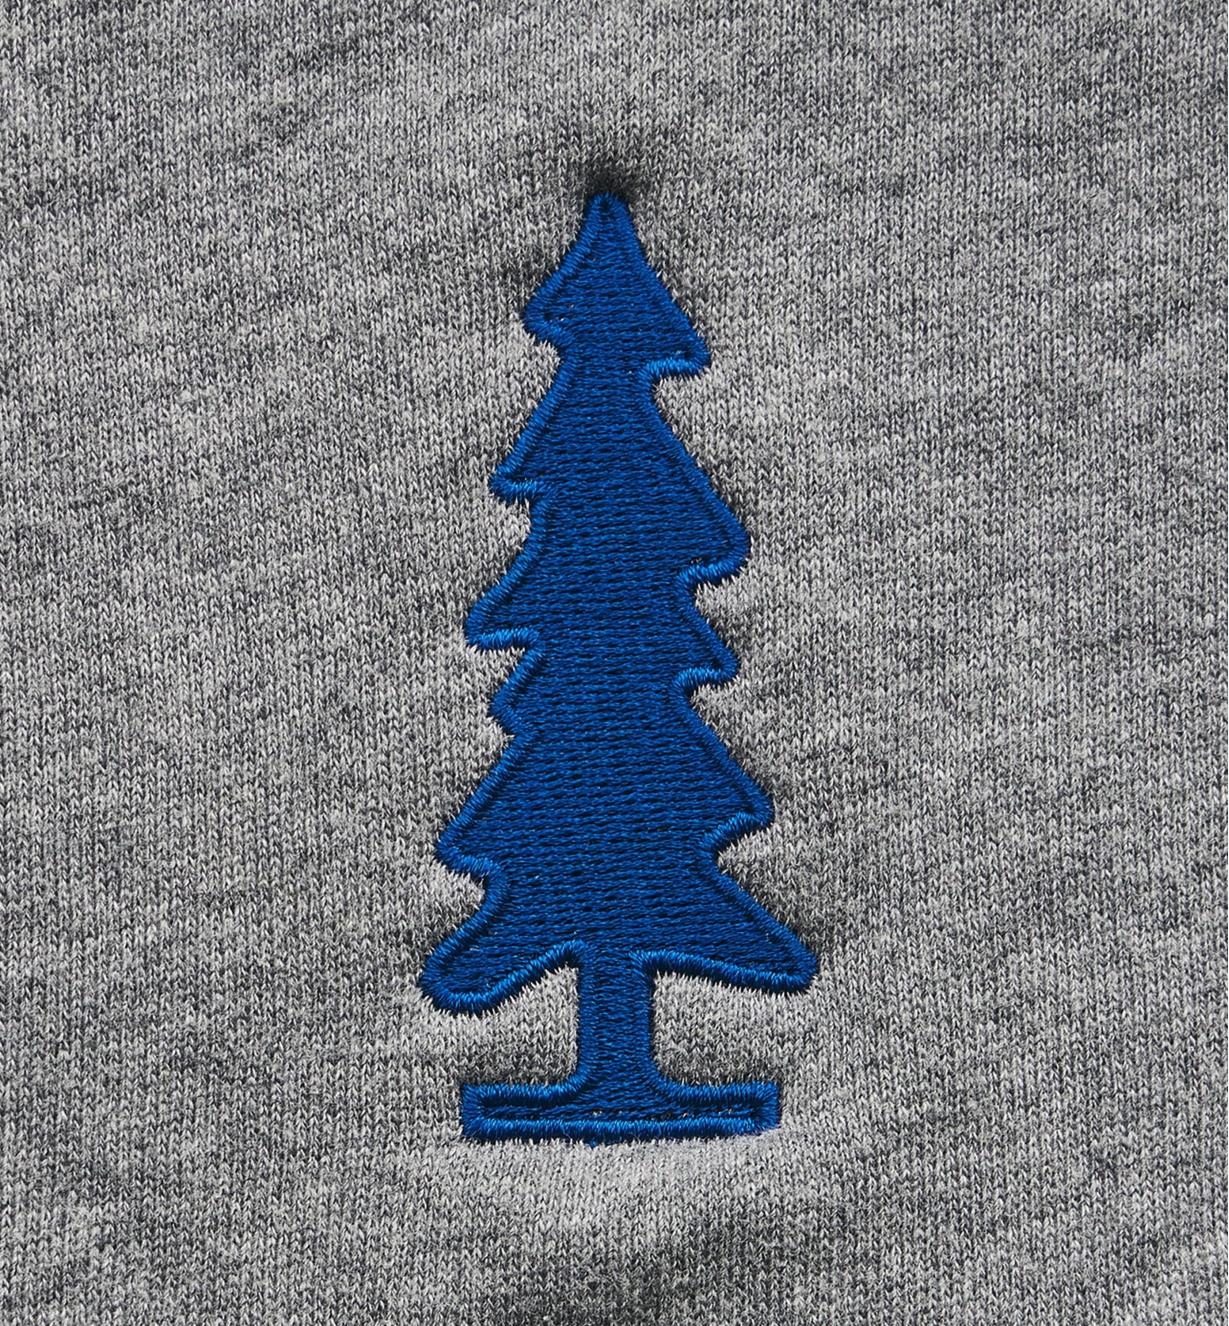 Close-up of tree logo embroidered onto front of sweatshirt